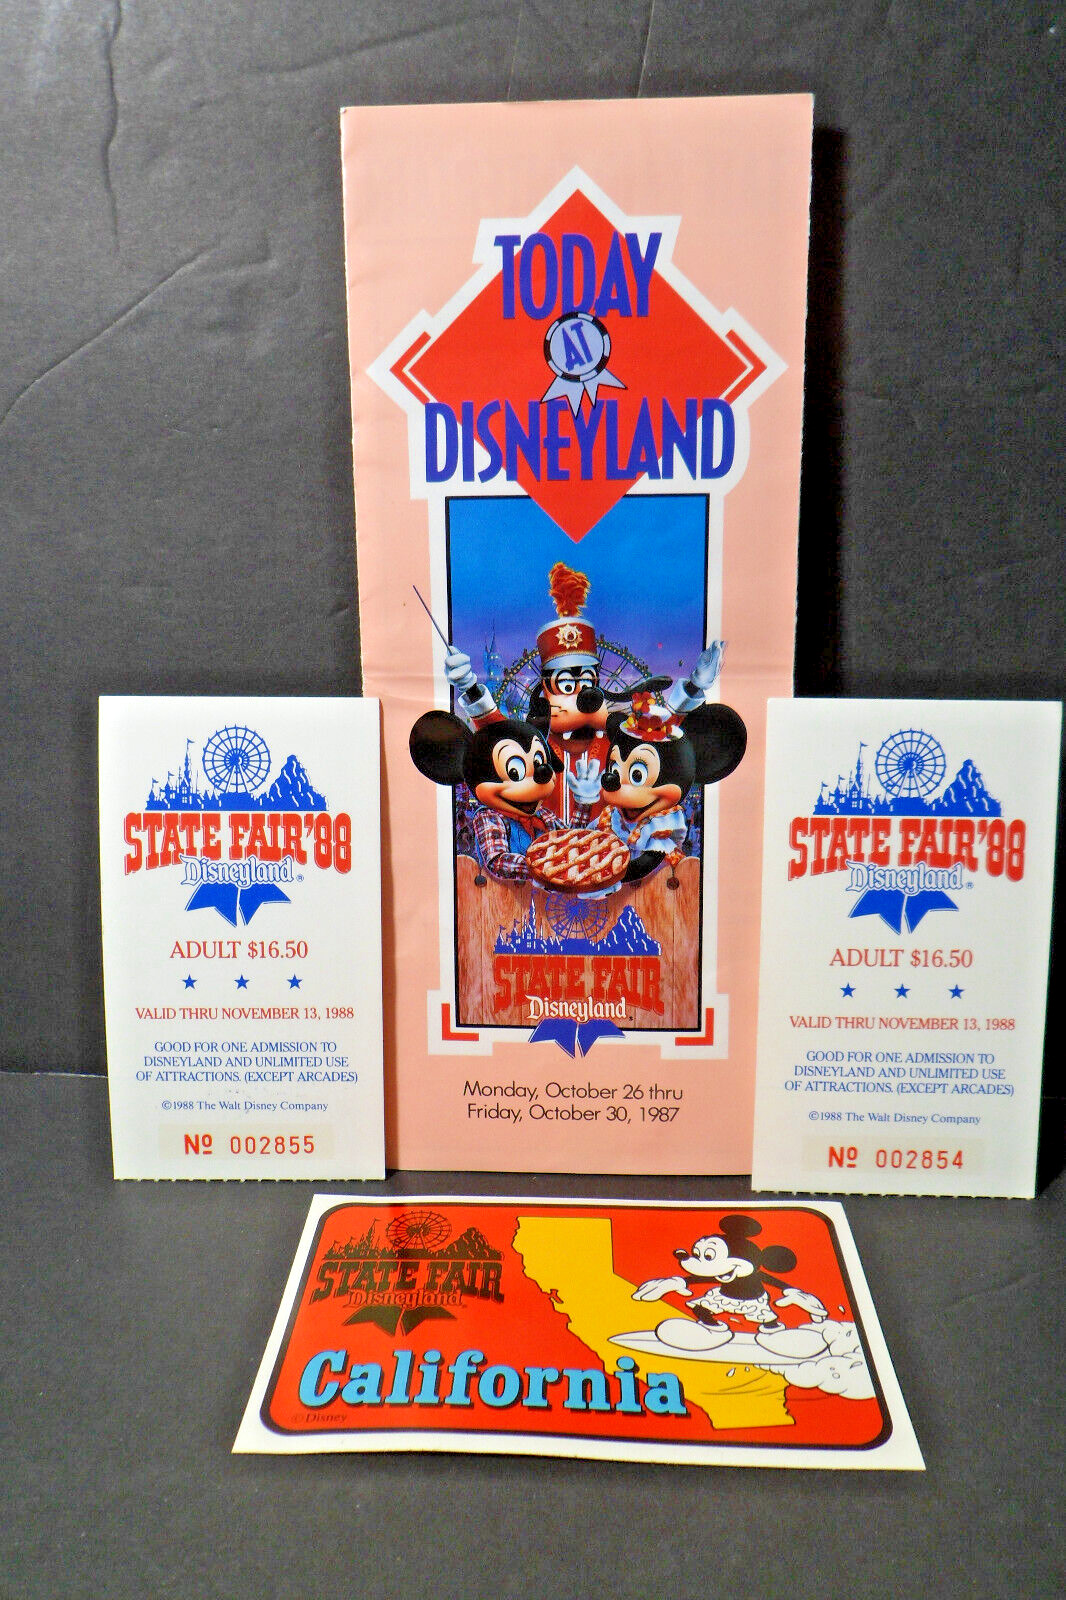 1988 Disneyland State Fair -Today Guide, 2 Tickets, California Sticker -Lot of 4